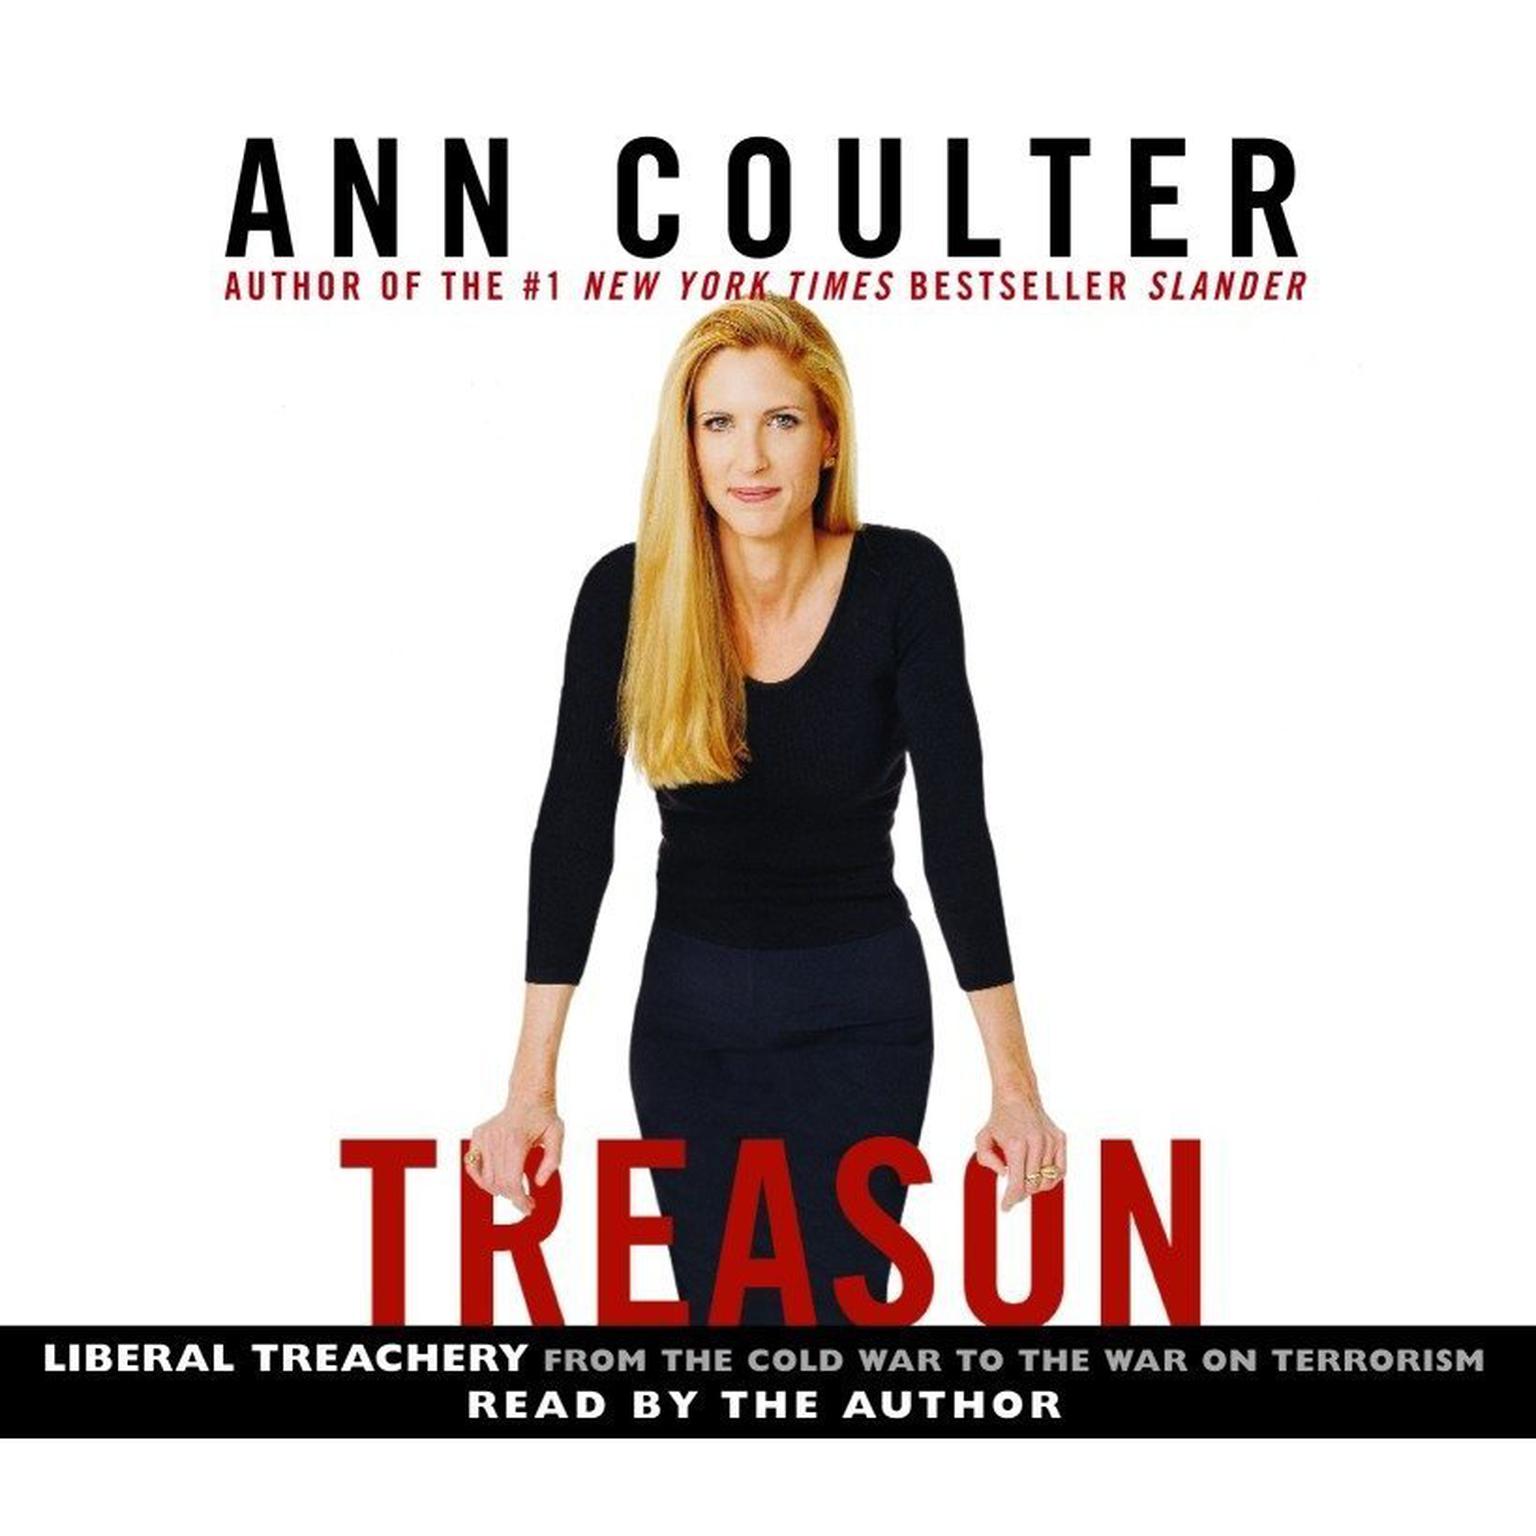 Treason (Abridged): Liberal Treachery from the Cold War to the War on Terrorism Audiobook, by Ann Coulter